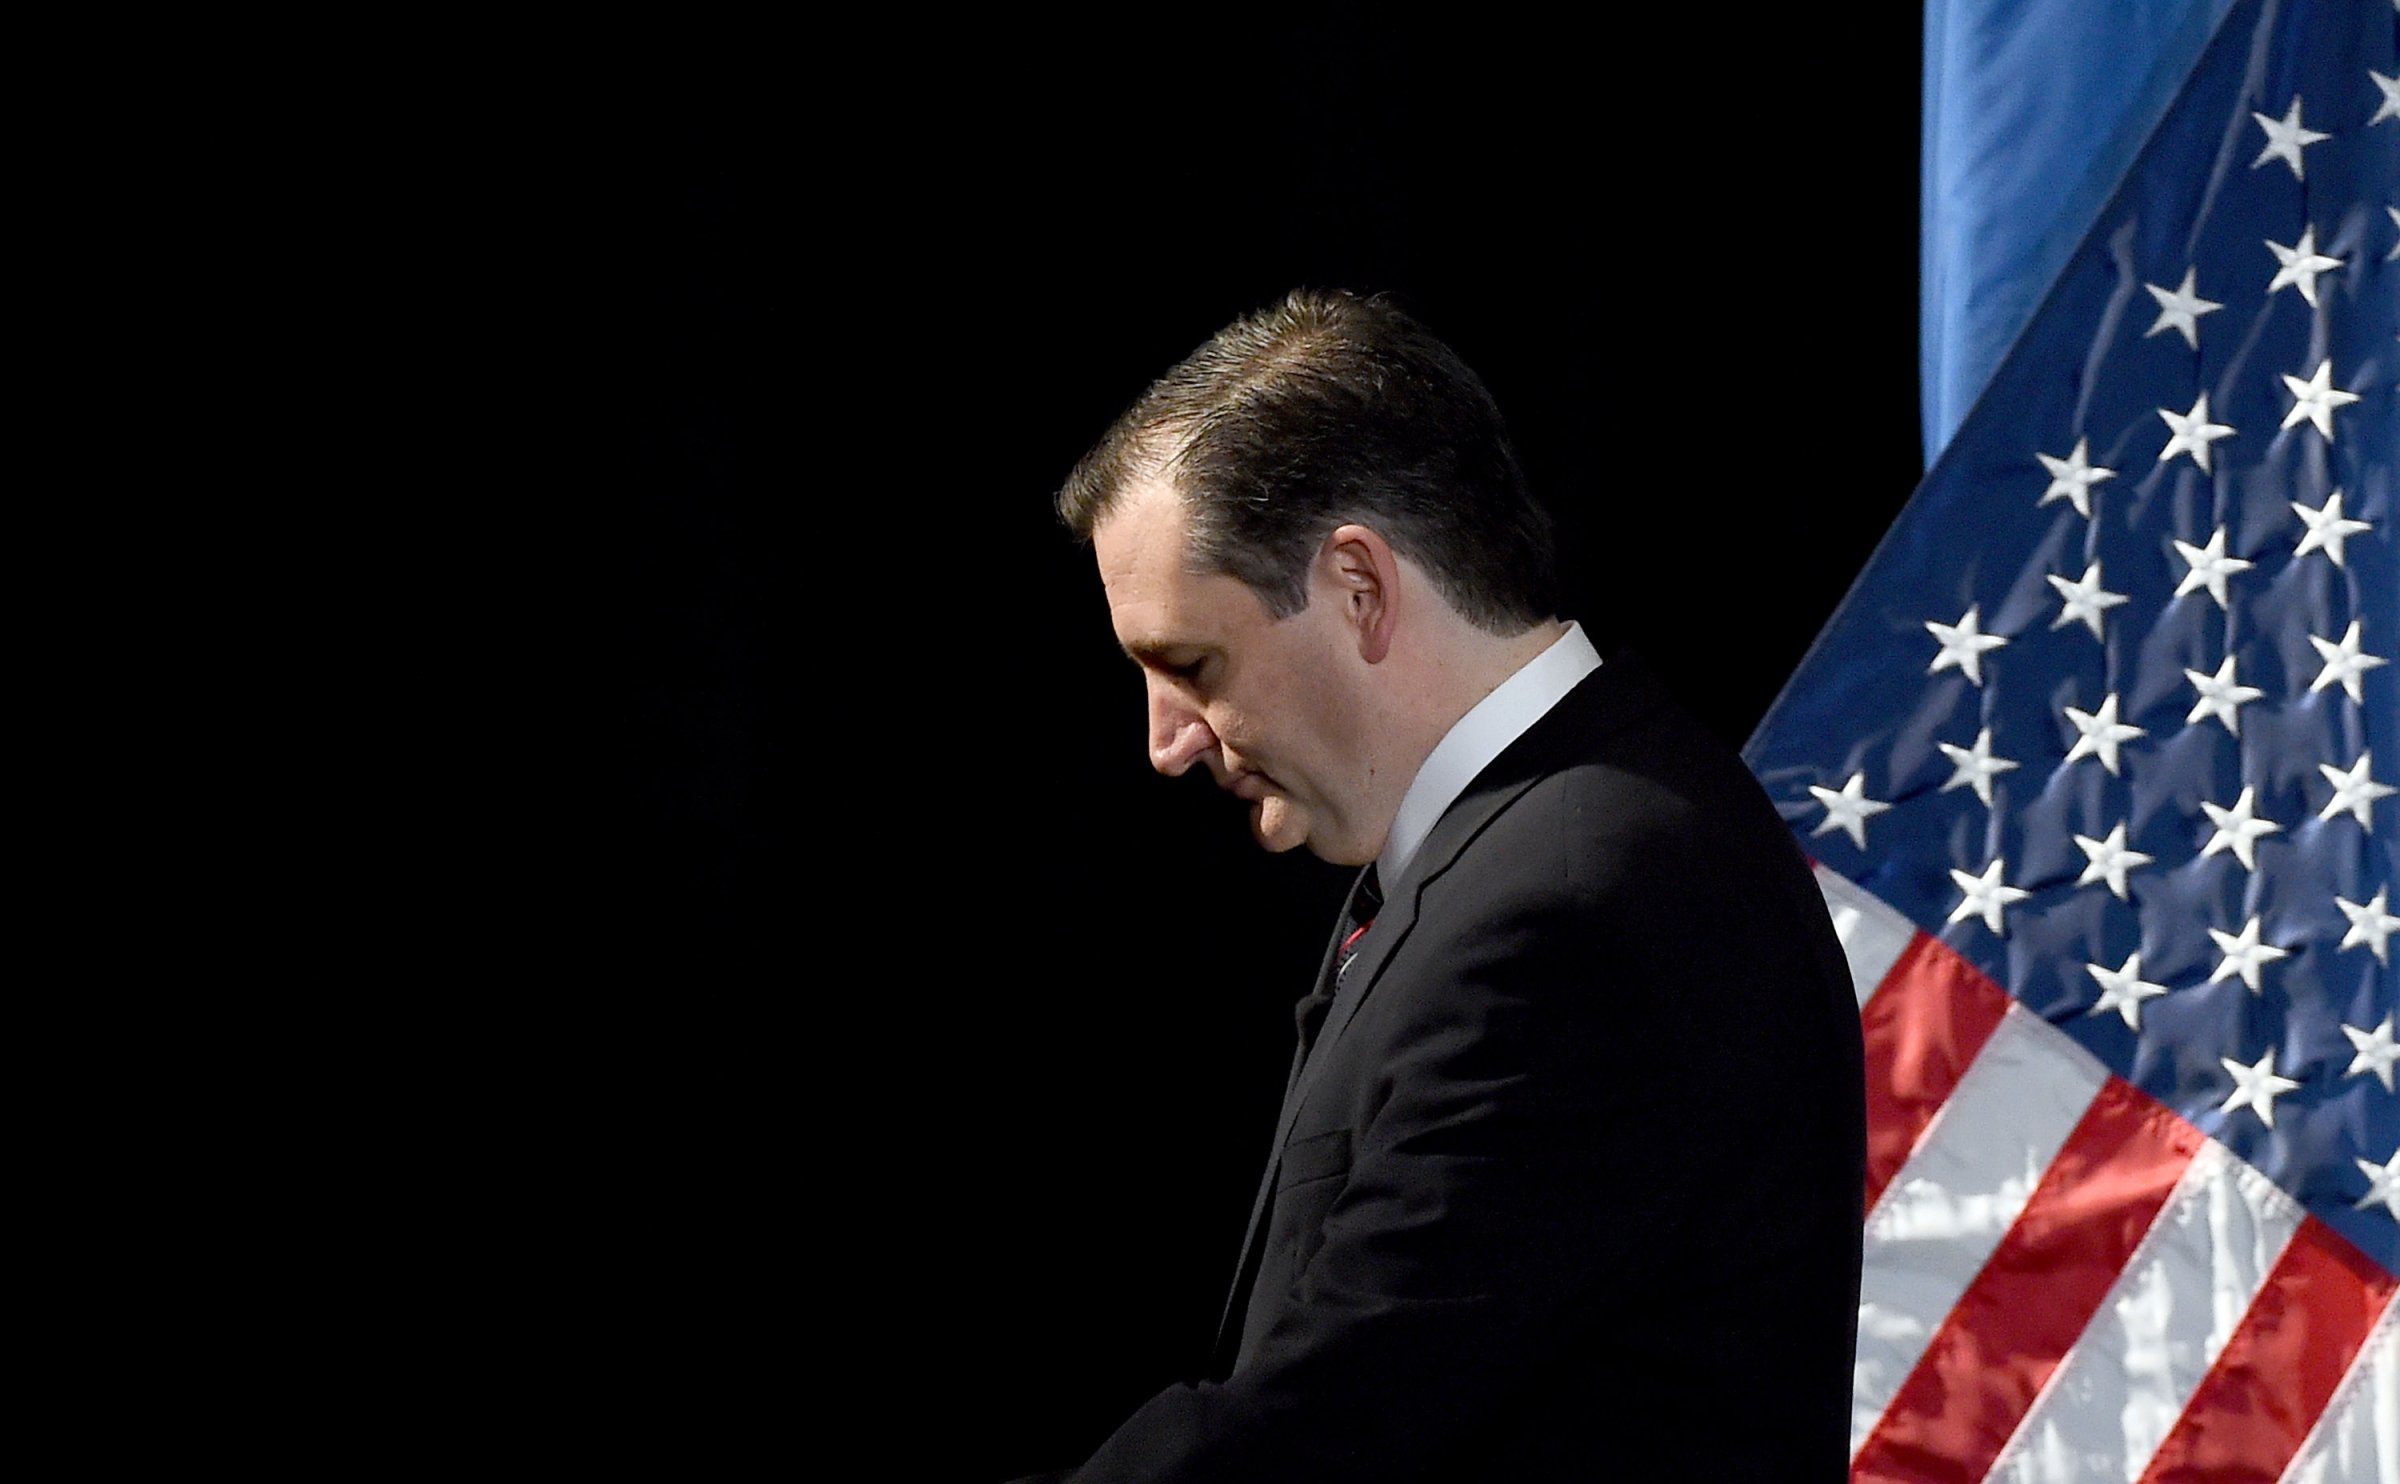 Republican presidential candidate U.S. Sen. Ted Cruz leaves the stage after speaking during the Republican Jewish Coalition spring leadership meeting at The Venetian Las Vegas on April 25, 2015 in Las Vegas, Nevada.